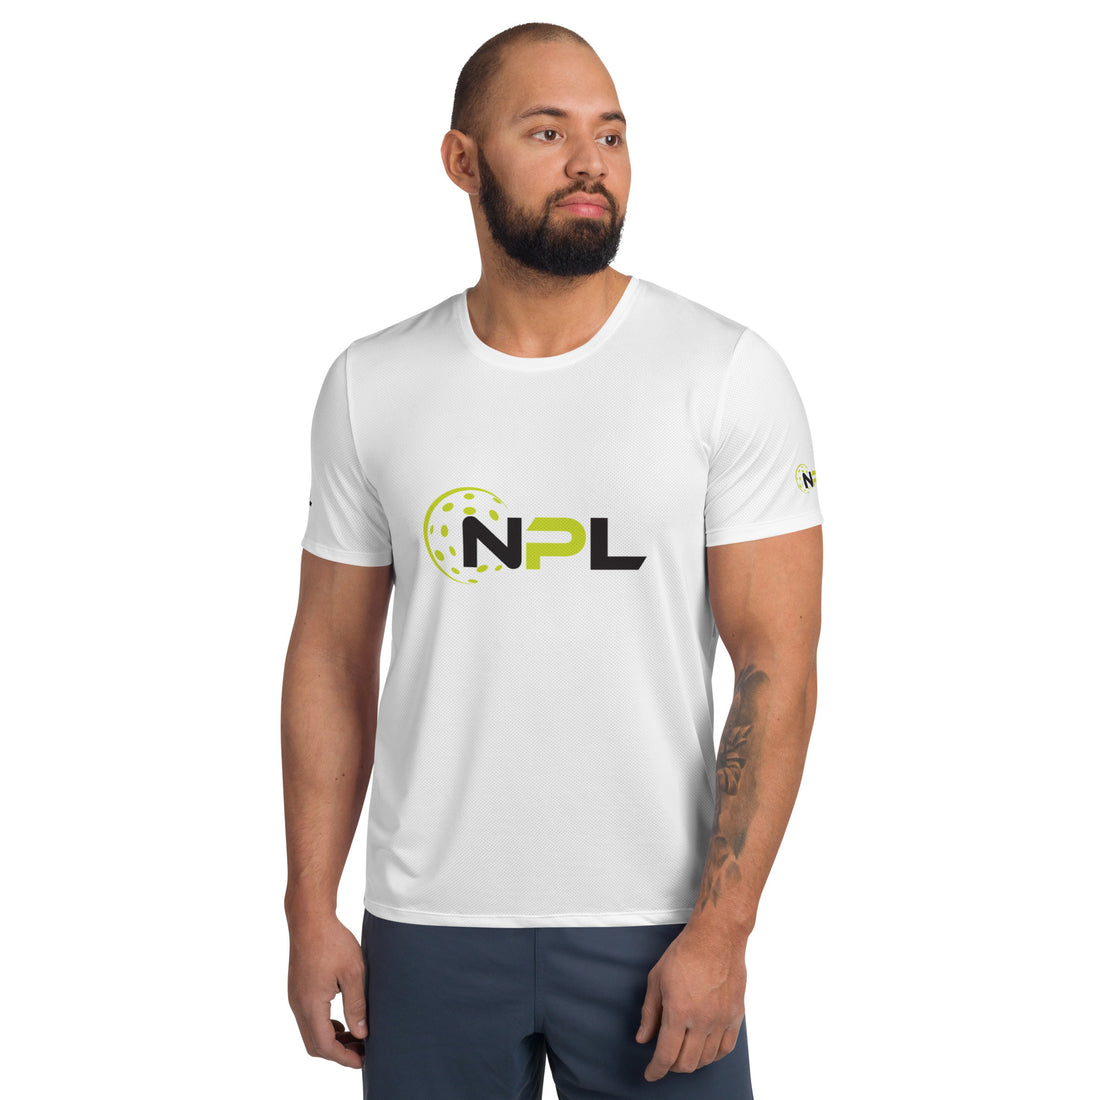 NPL™ Men's Athletic Performance Shirt - Stay Dry and Comfortable